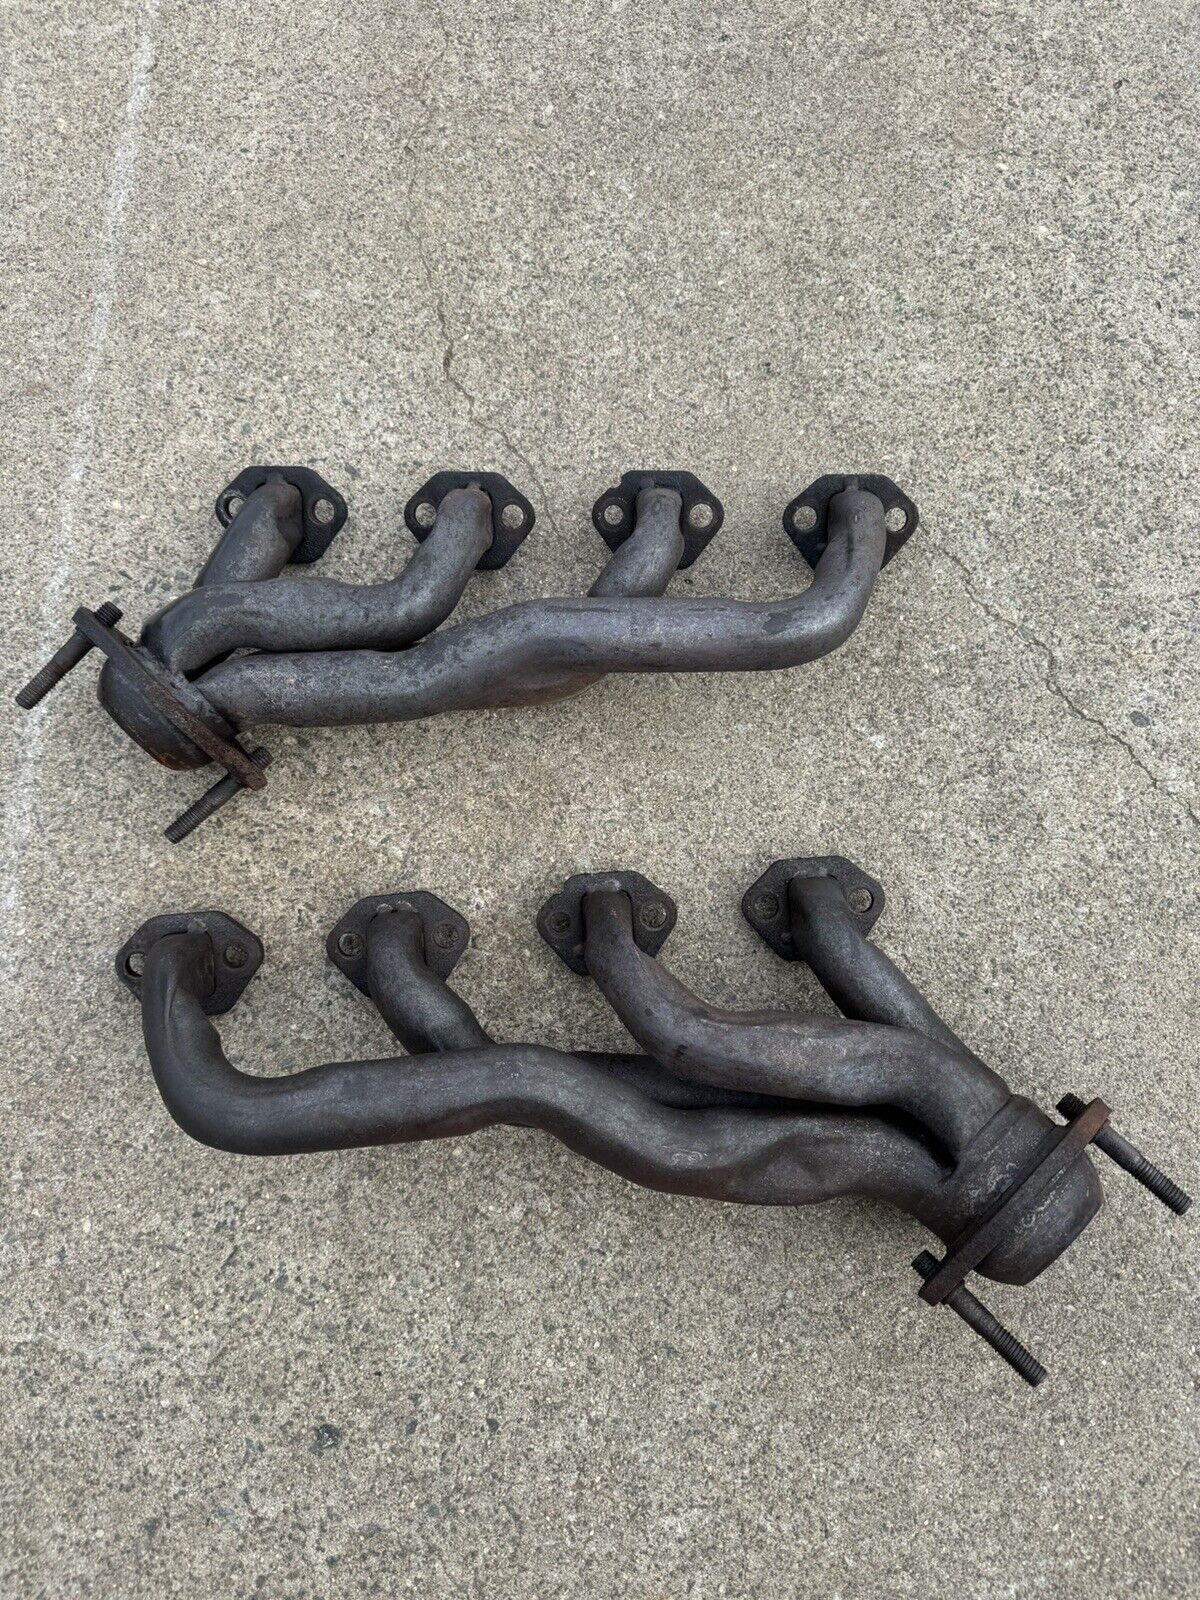 87-93 Ford Mustang FoxBody 5.0L 302 Stock  Factory Exhaust Headers Manifold